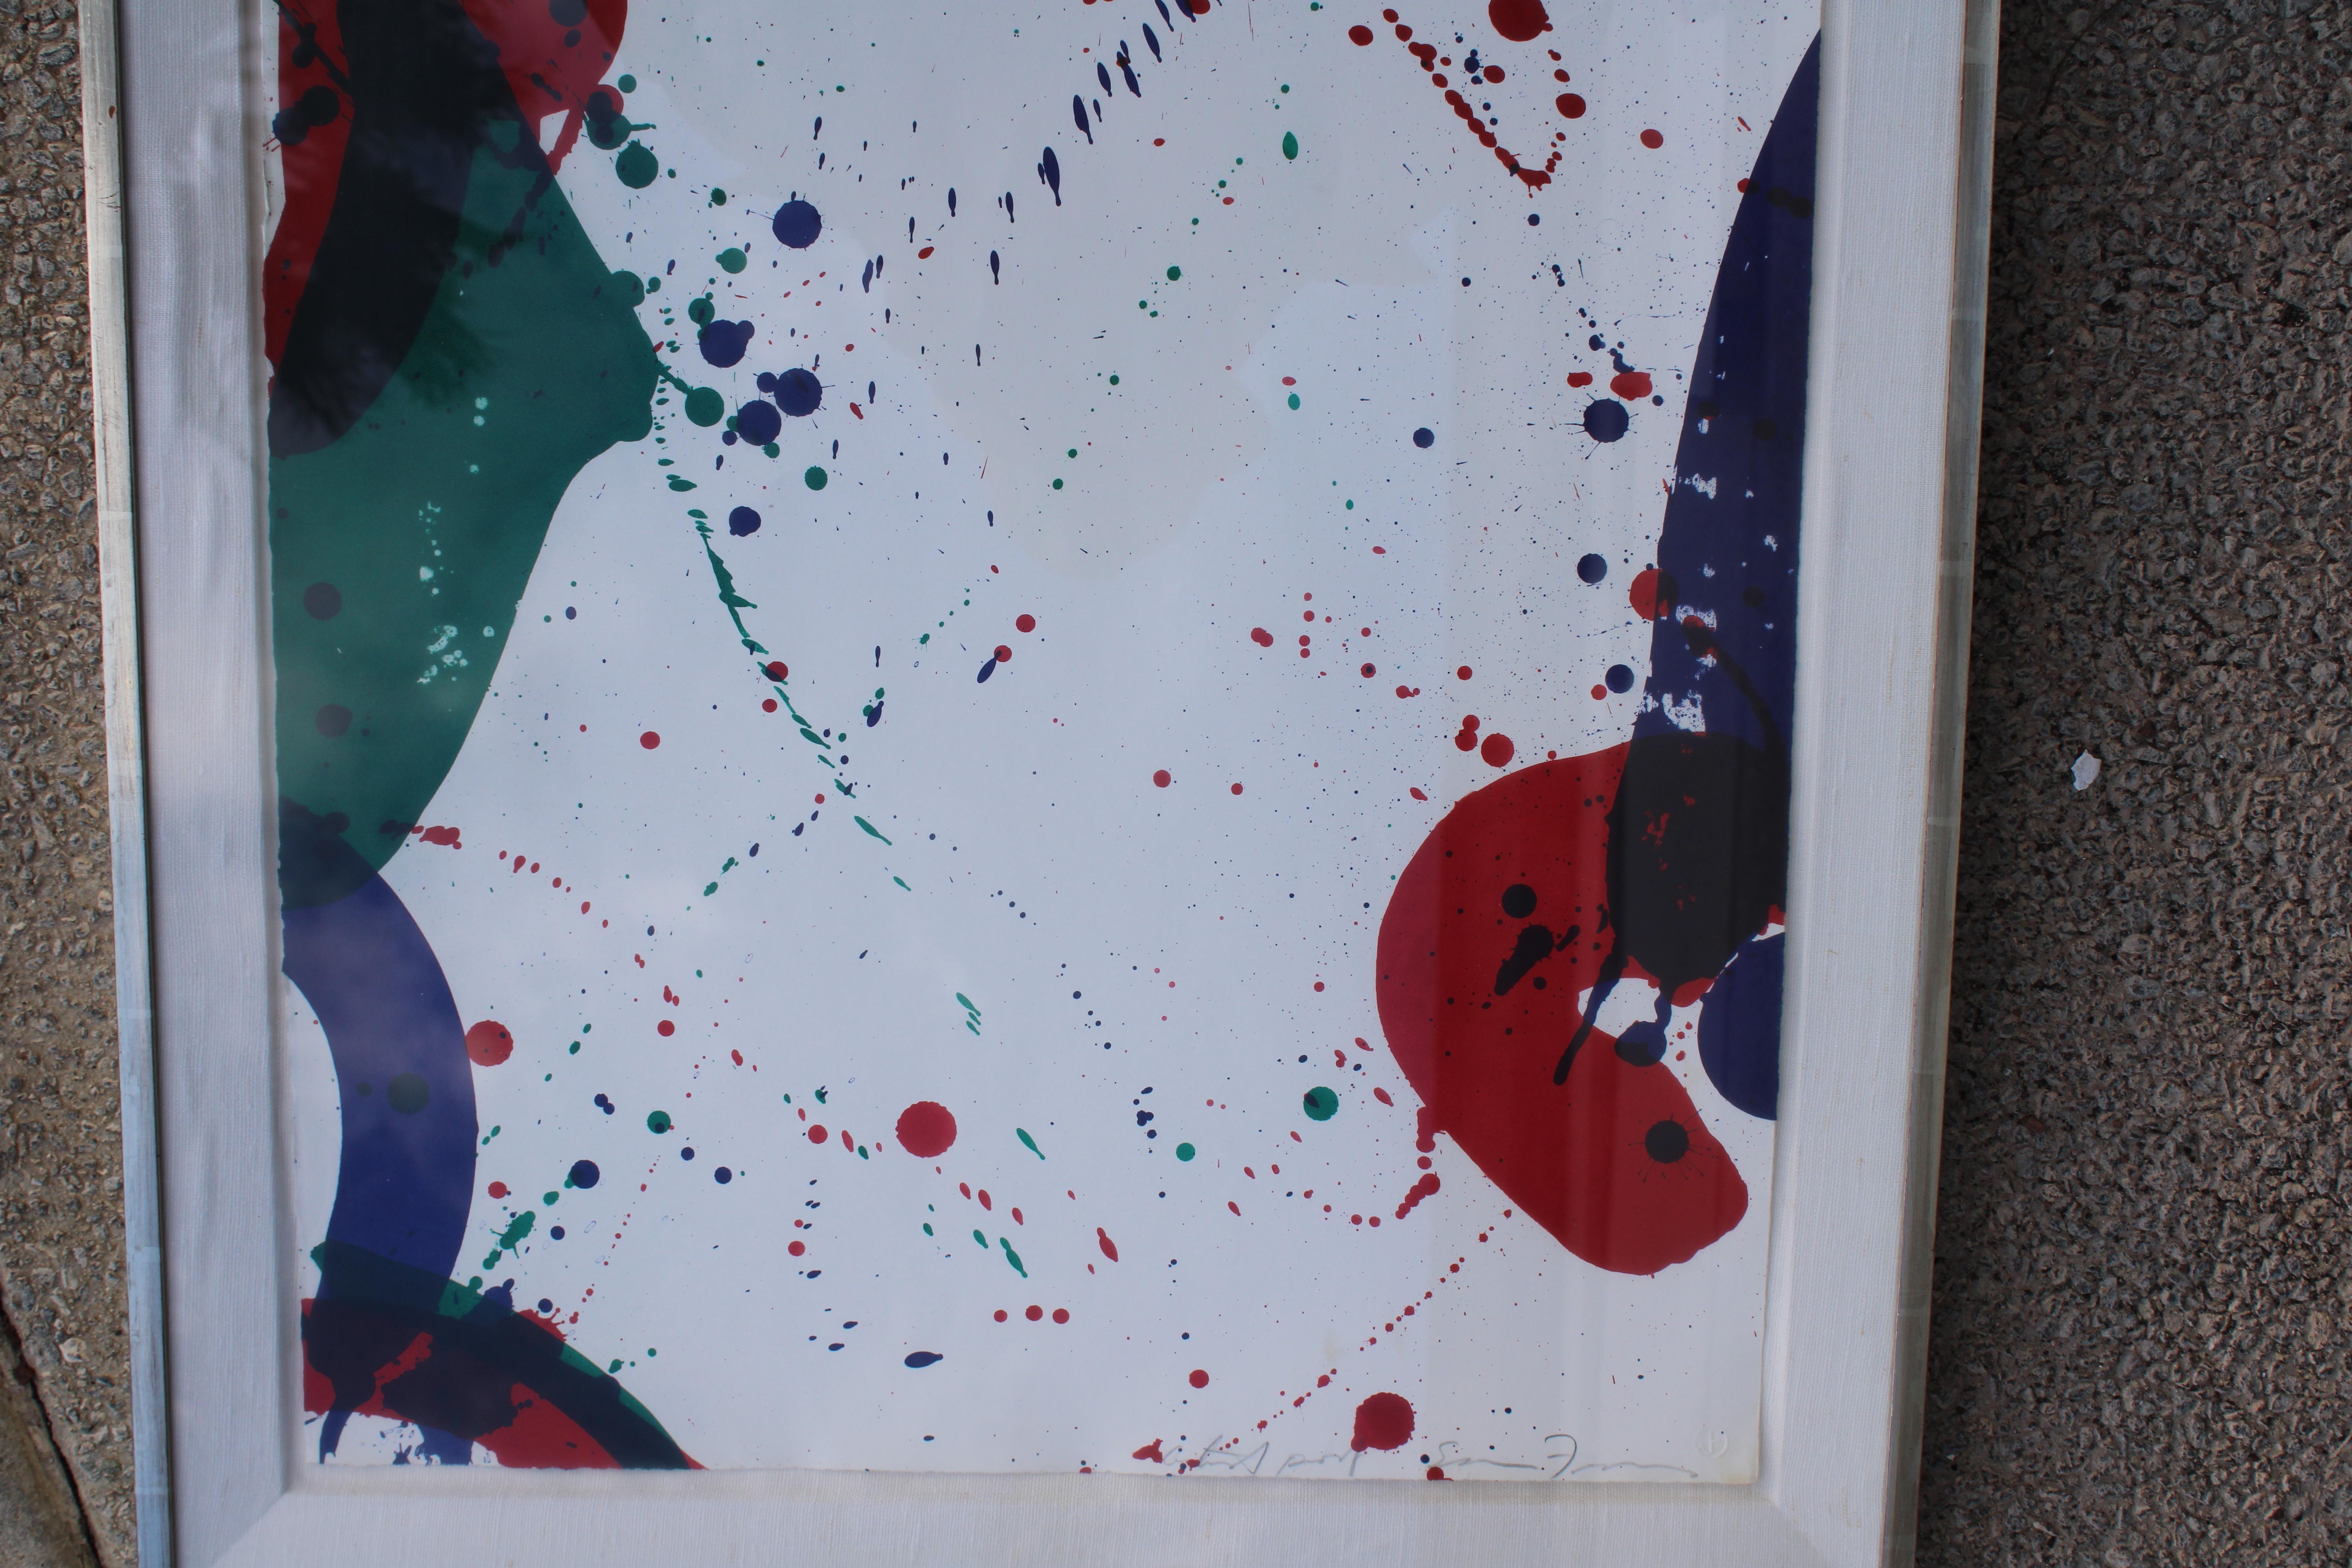 Abstract Sam Francis Artist Proof Lithograph In Good Condition For Sale In Palm Springs, CA